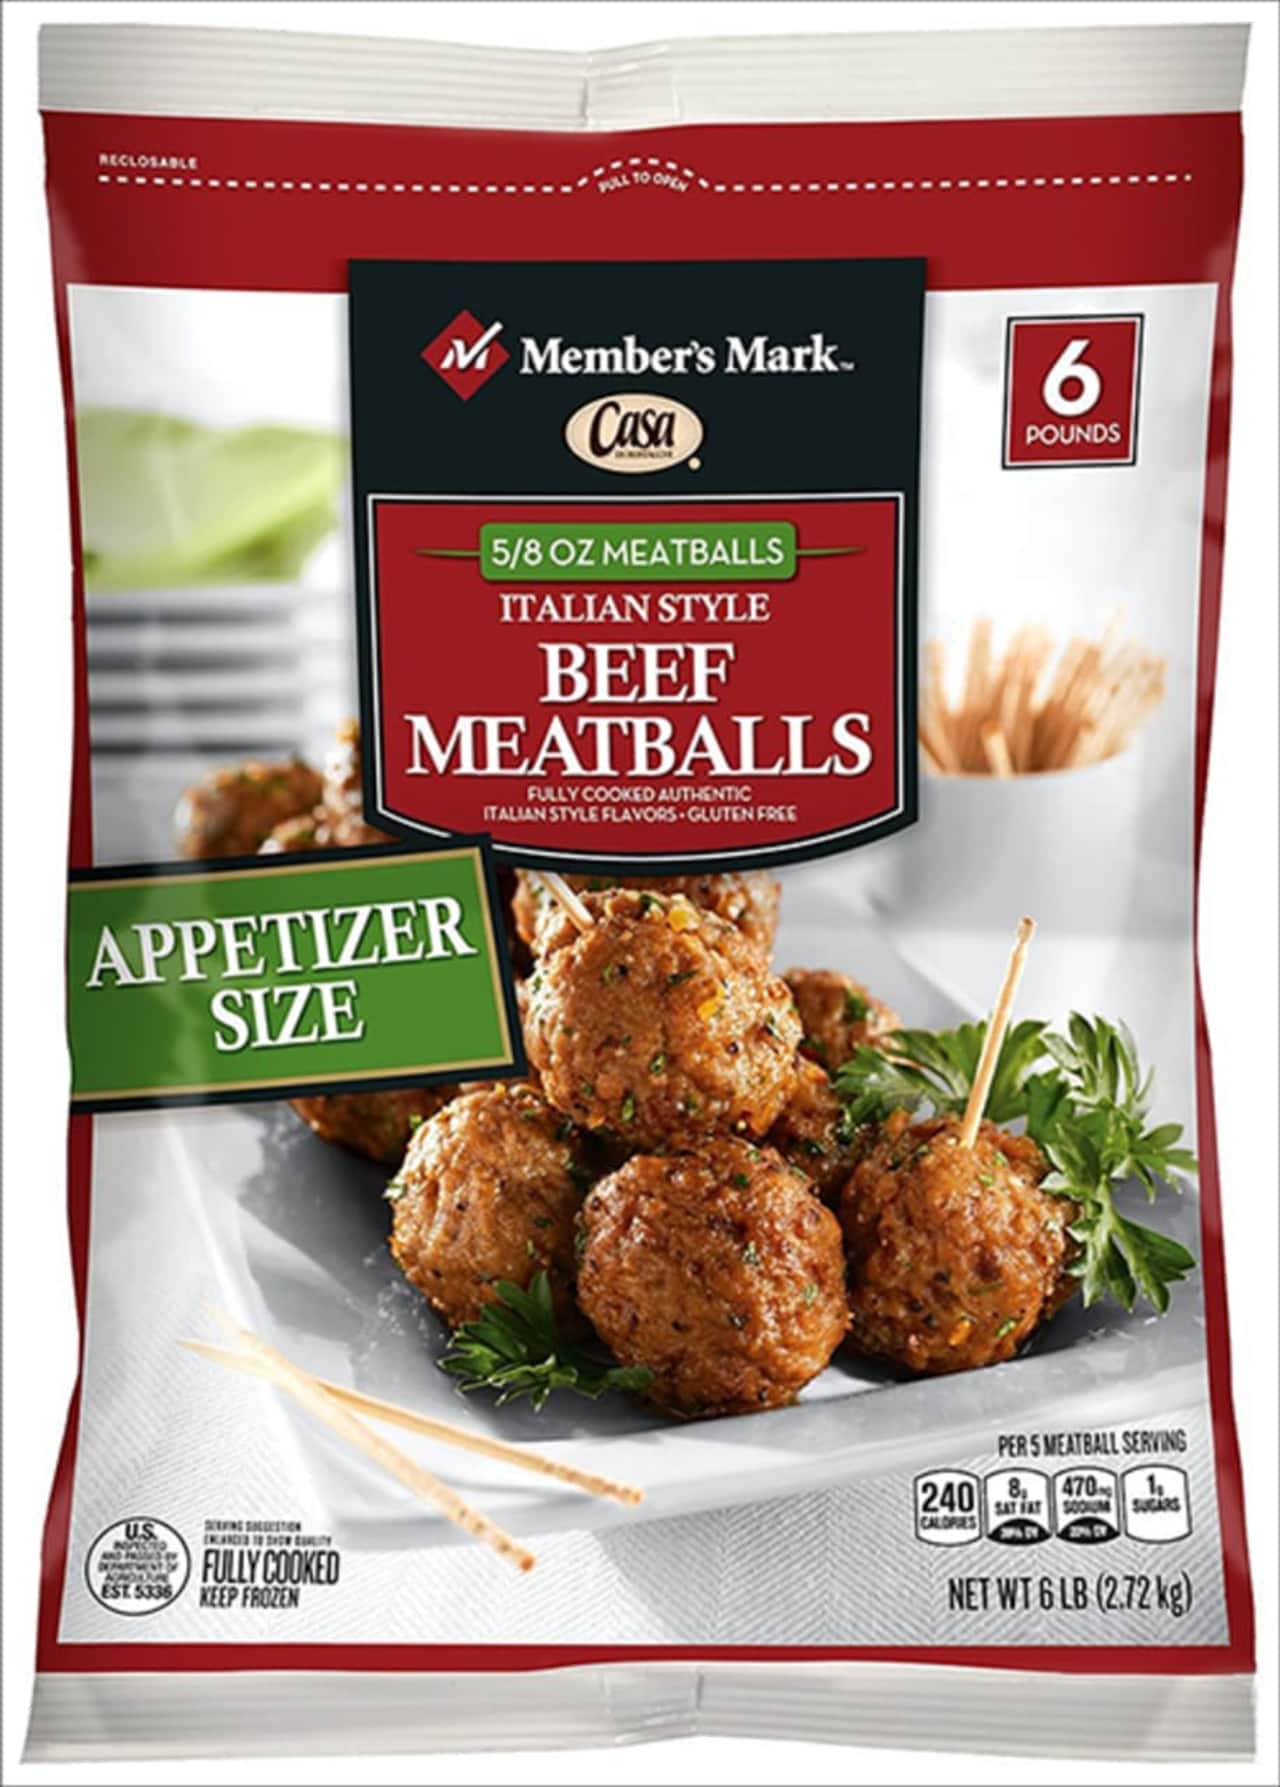 The label of the meatball that may be adulterated by a contaminant.